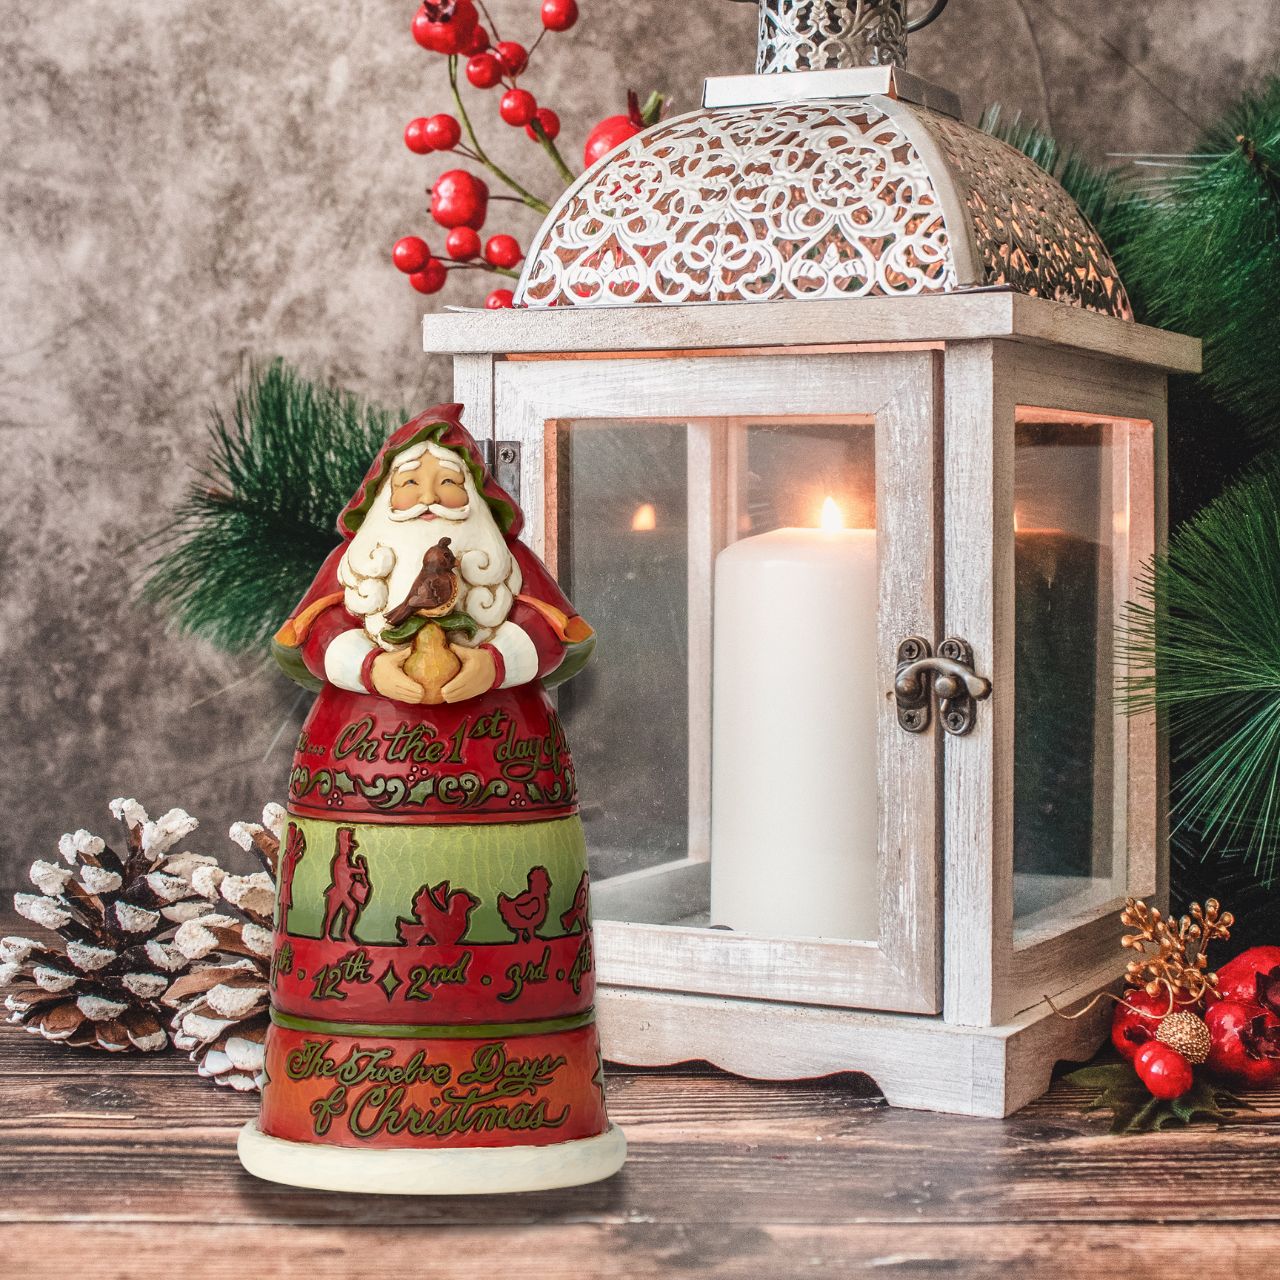 Jim Shore Heartwood Creek Offerings From The Heart  Heartwood Creek 12 Days of Christmas Santa is made of hand painted resin, wood style. Heartwood Creek Collection created by the American artist Jim Shore. 